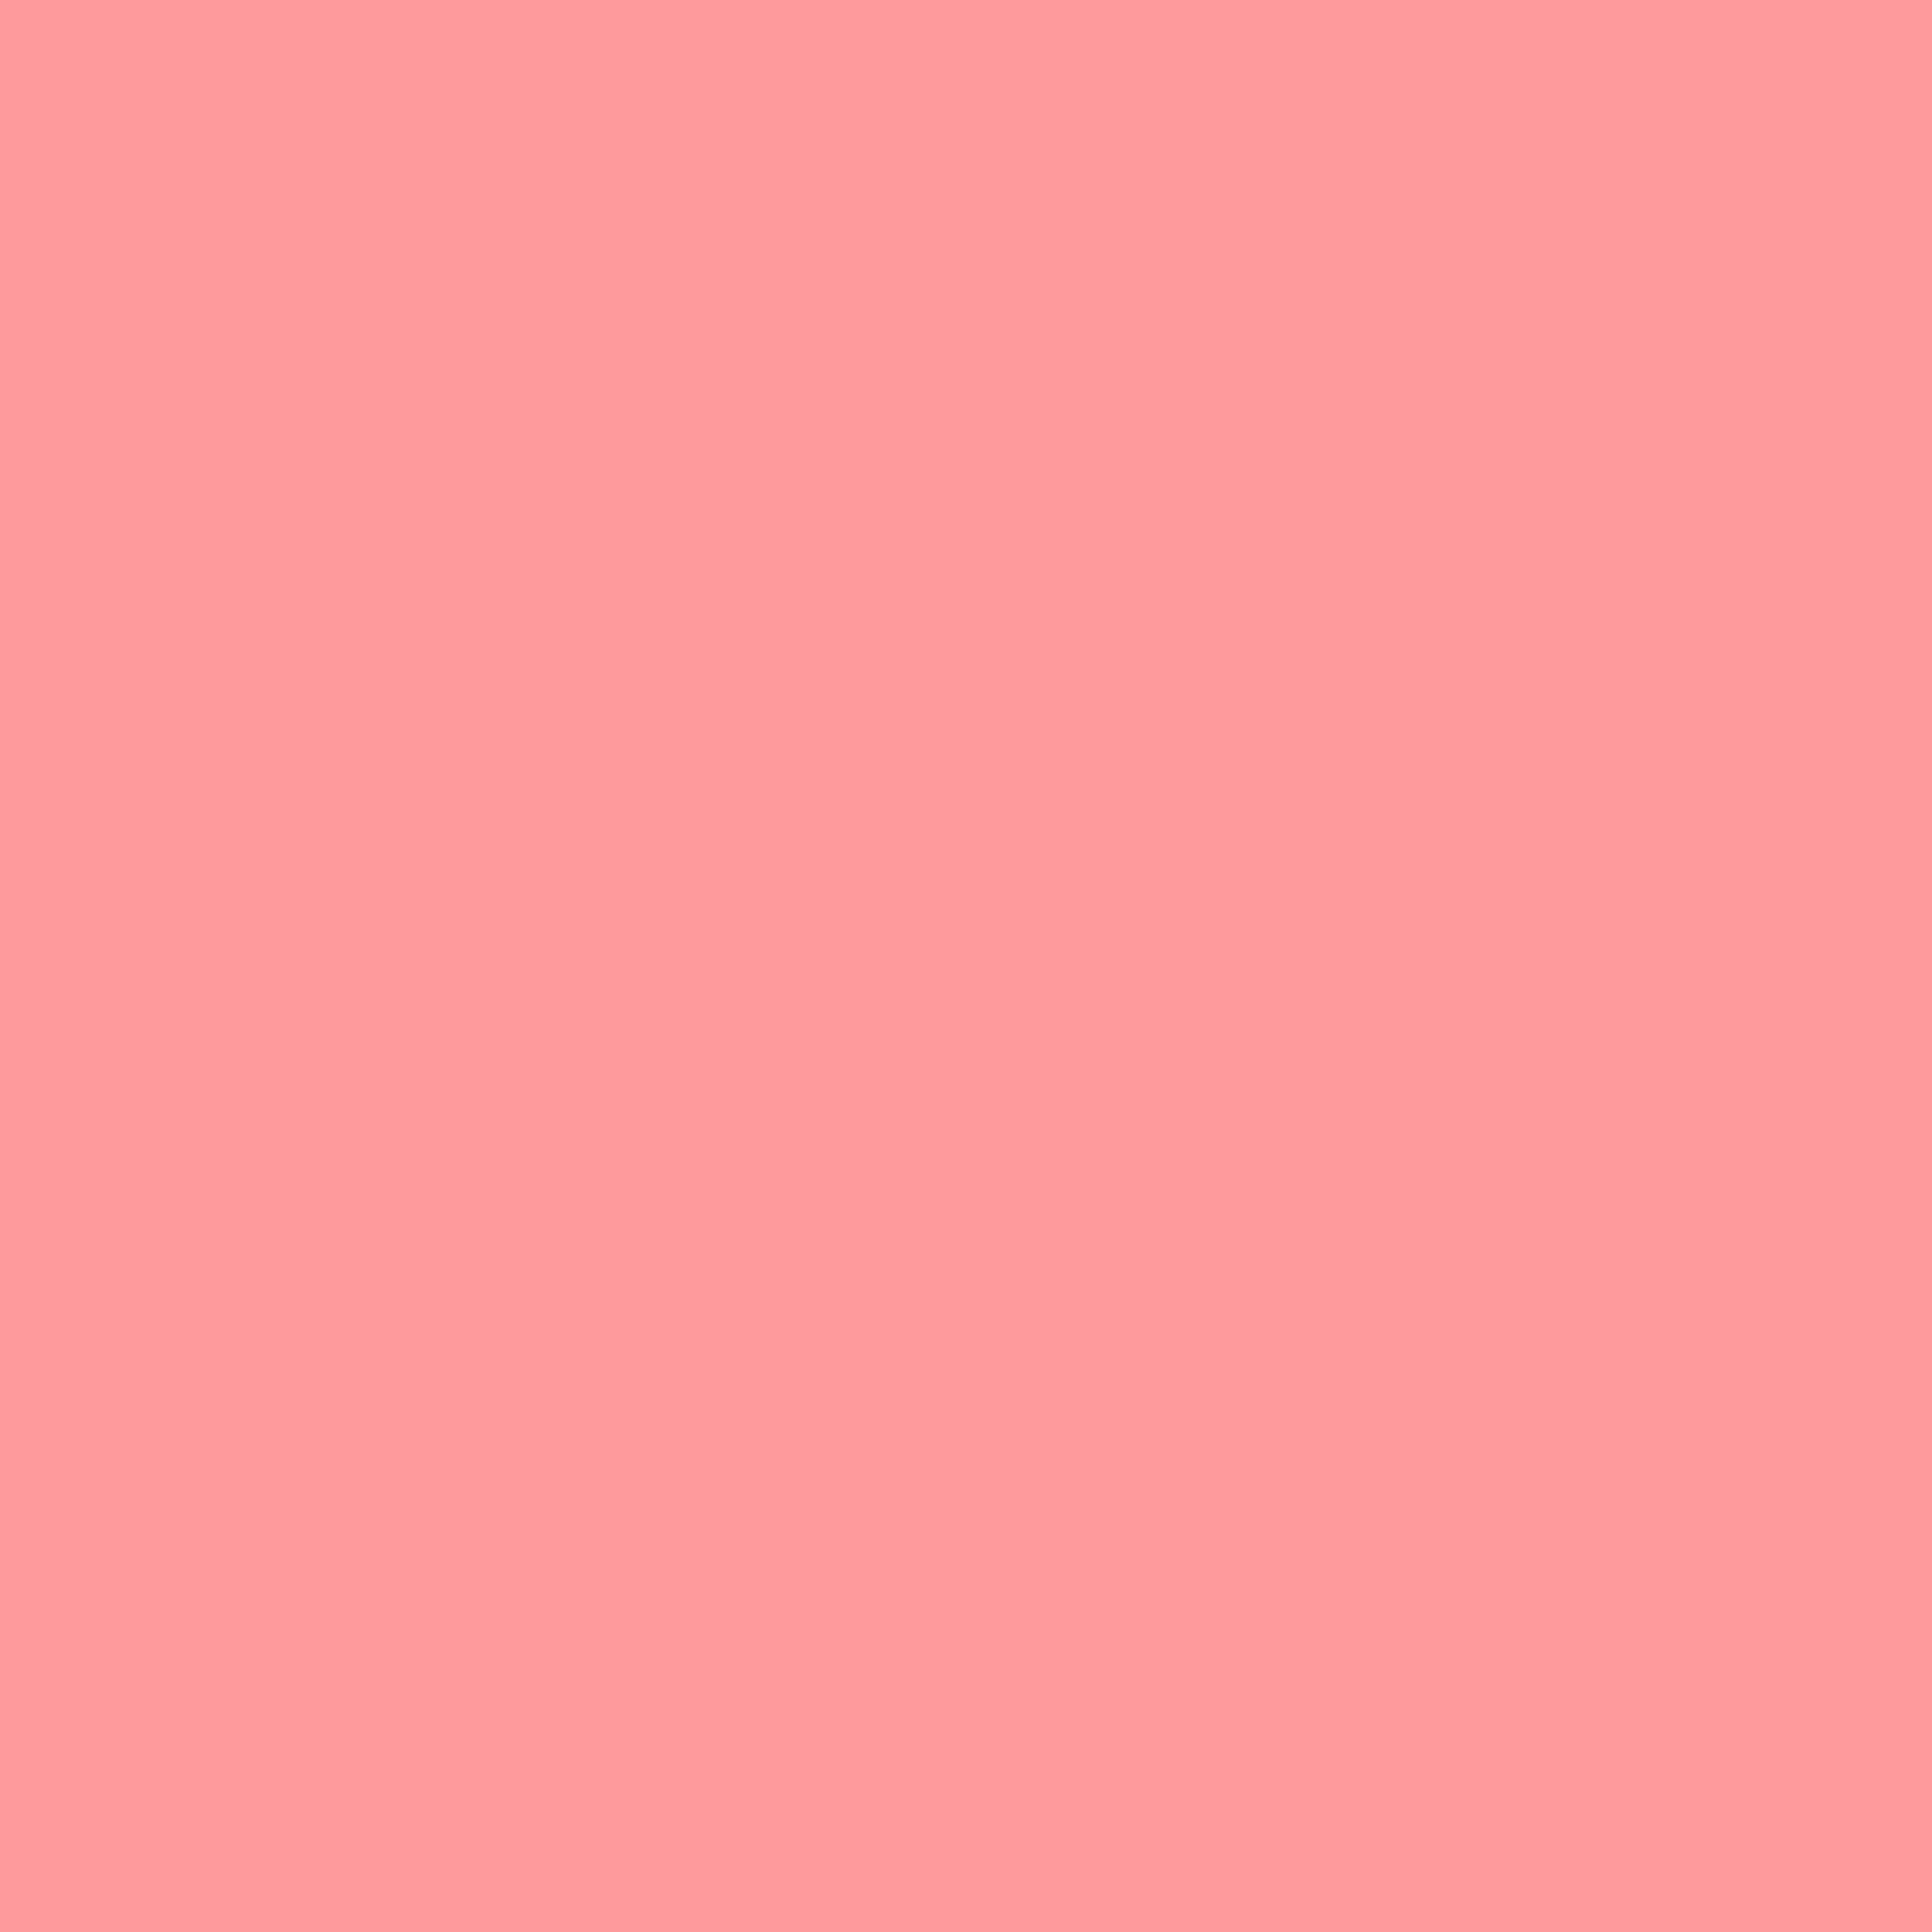 3600x3600 Light Salmon Pink Solid Color Background